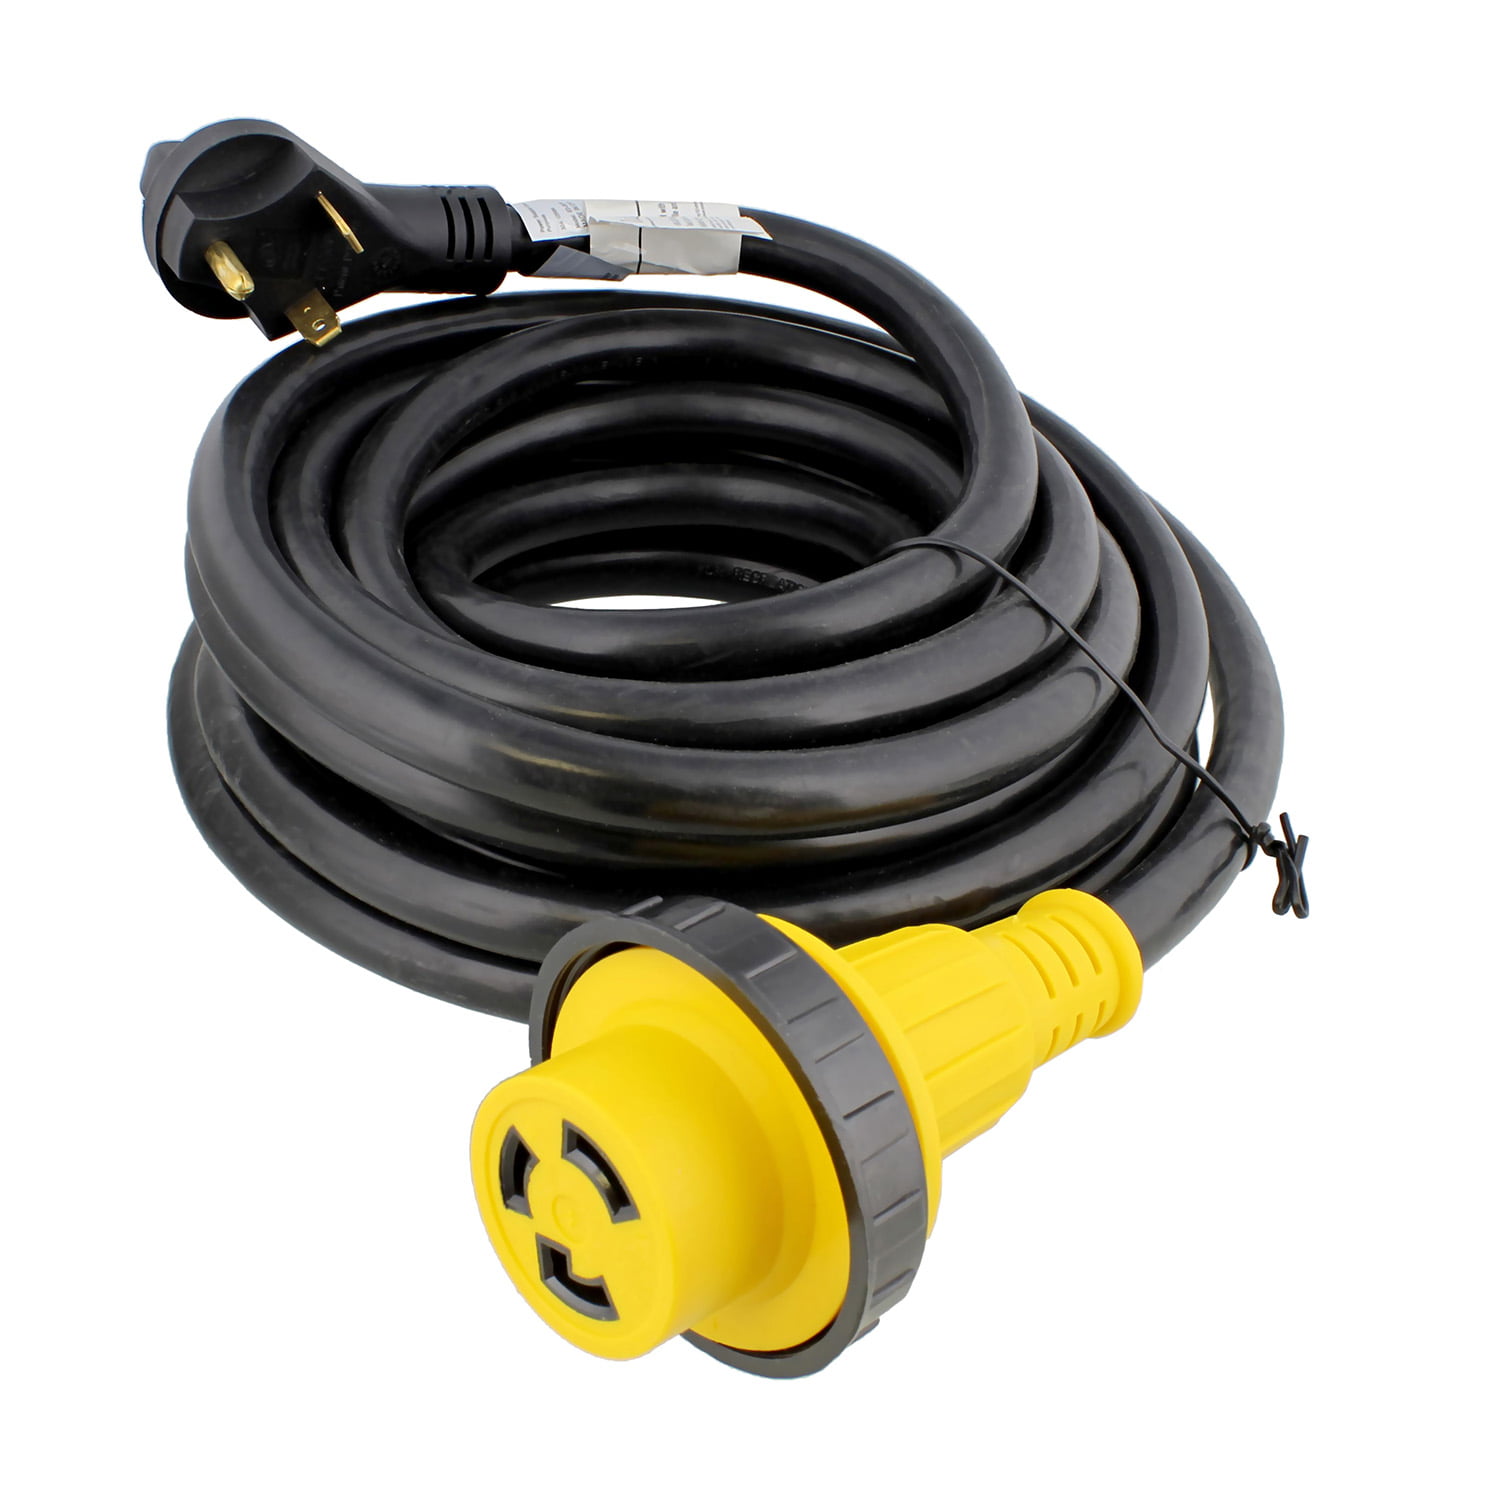 30 Amp RV Extension Power Cord  25FT 30a Male to 30a Female Cord Grip Handle 